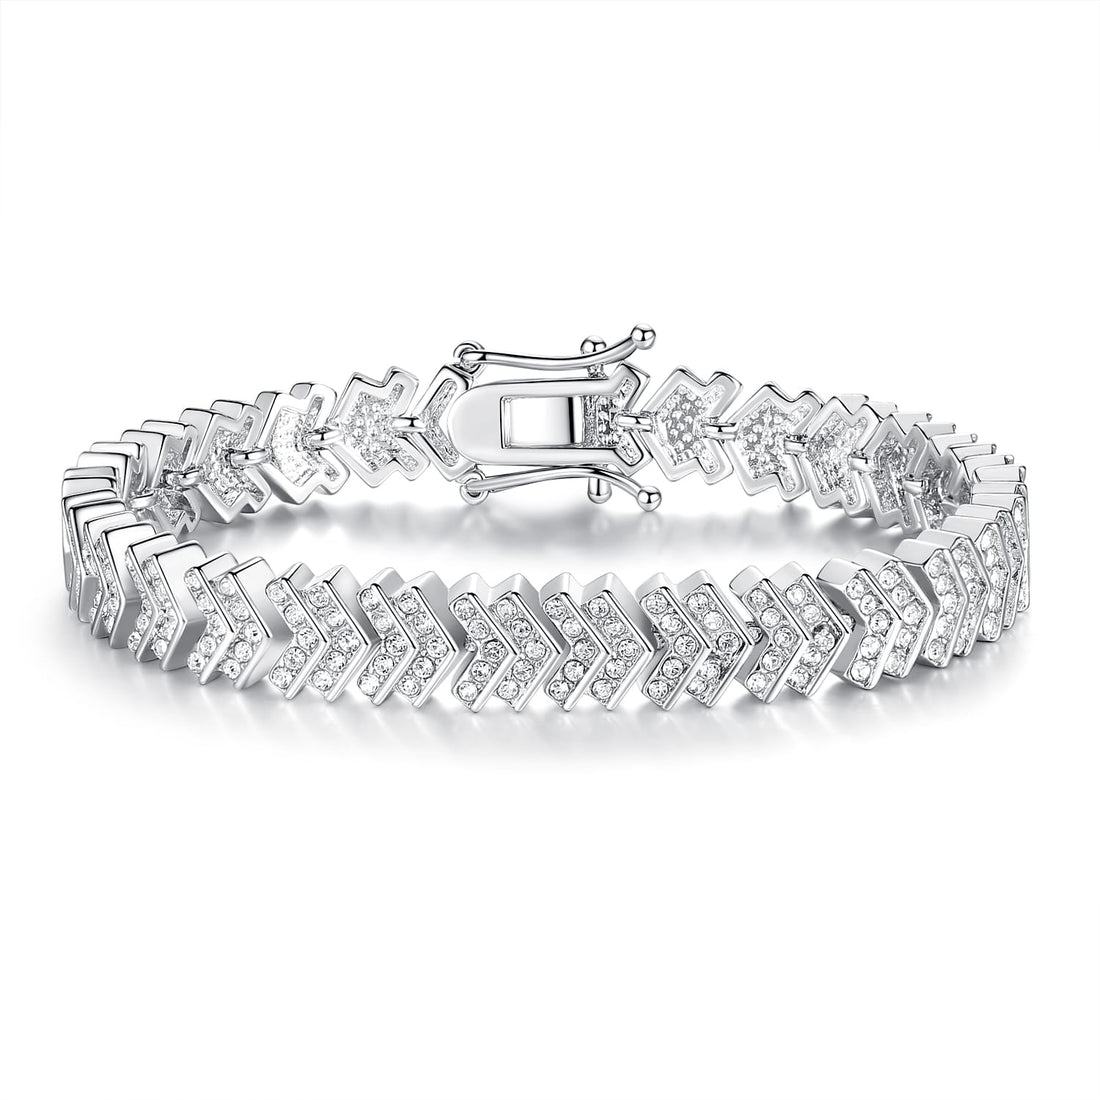 Silver toned, white gold plated bracelet featuring clear cut crystals set in chevron design links with an elegant clasp integrated into the design